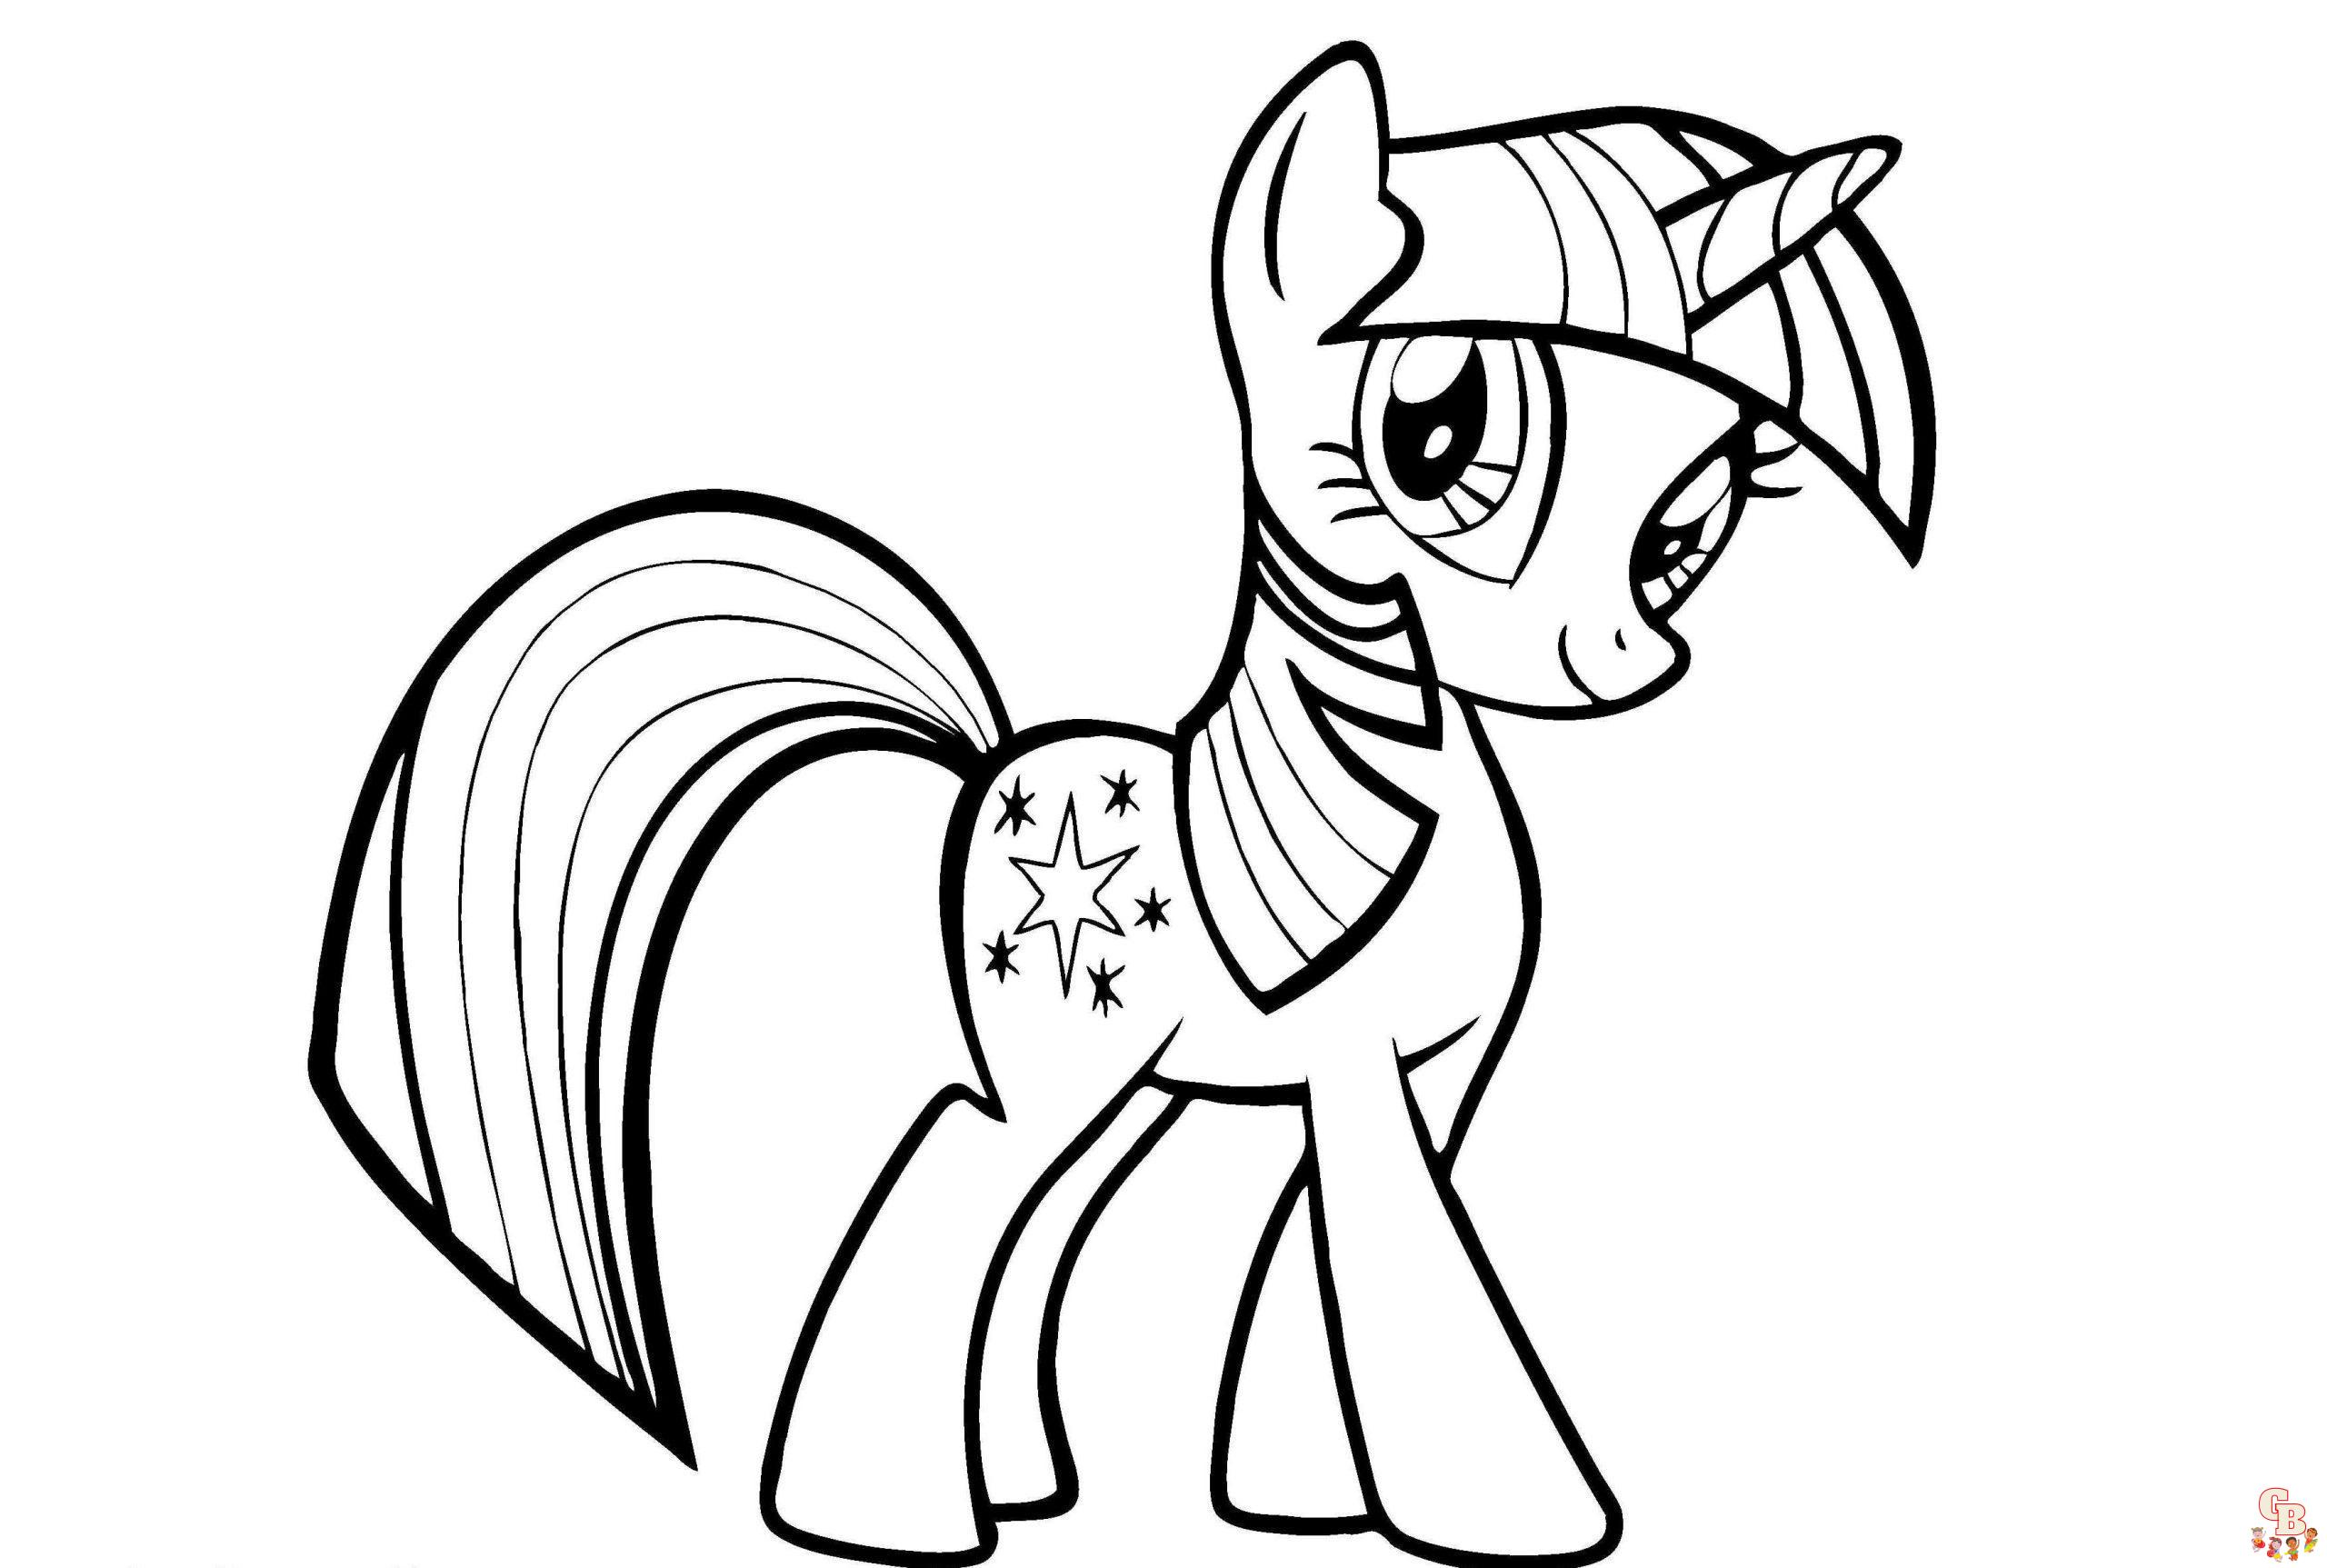 Cute Twilight Sparkle coloring pages printable free